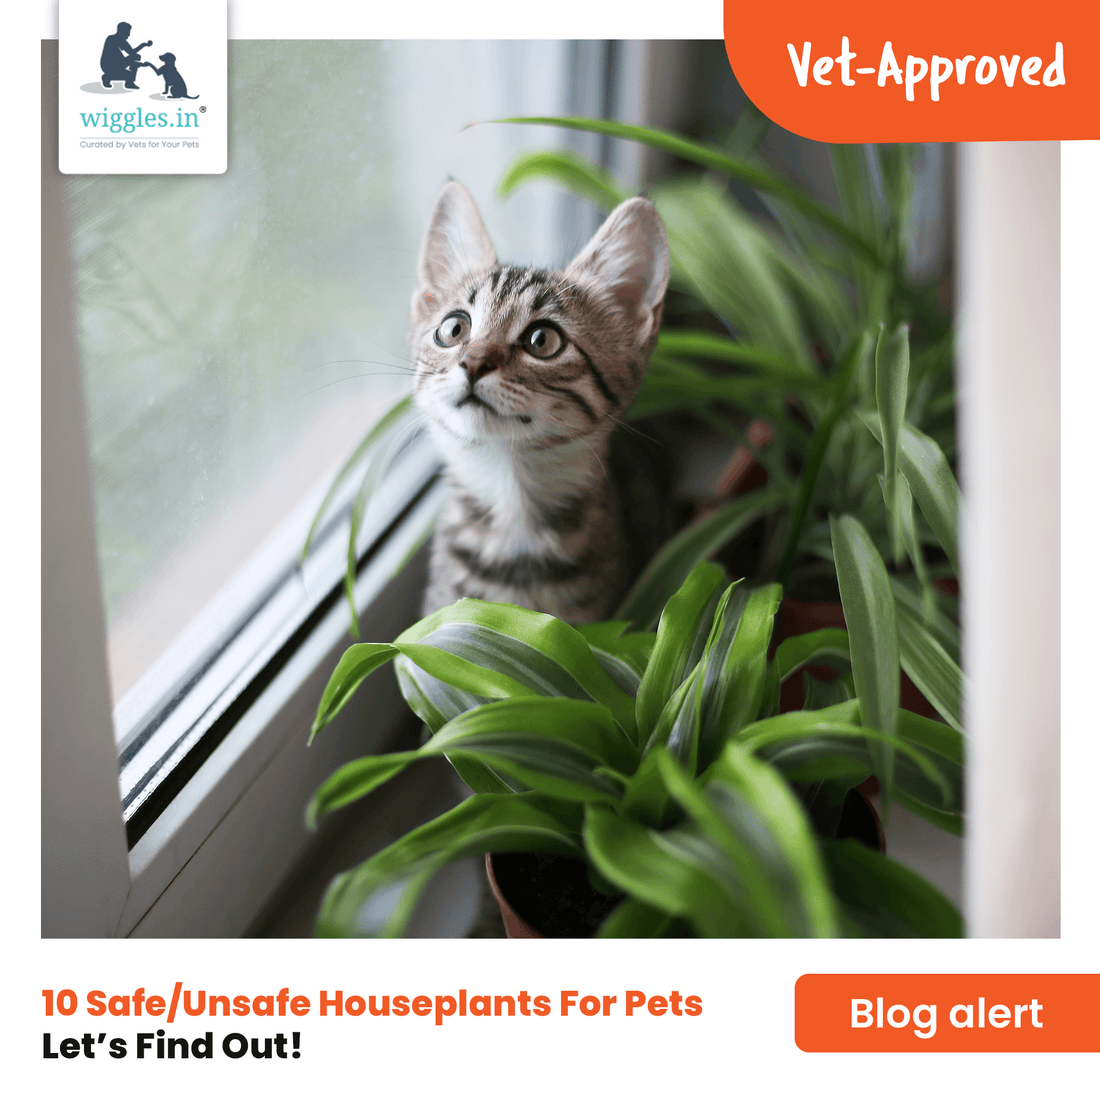 Top 10 Popular Safe And Unsafe Houseplants For Pets - Wiggles.in